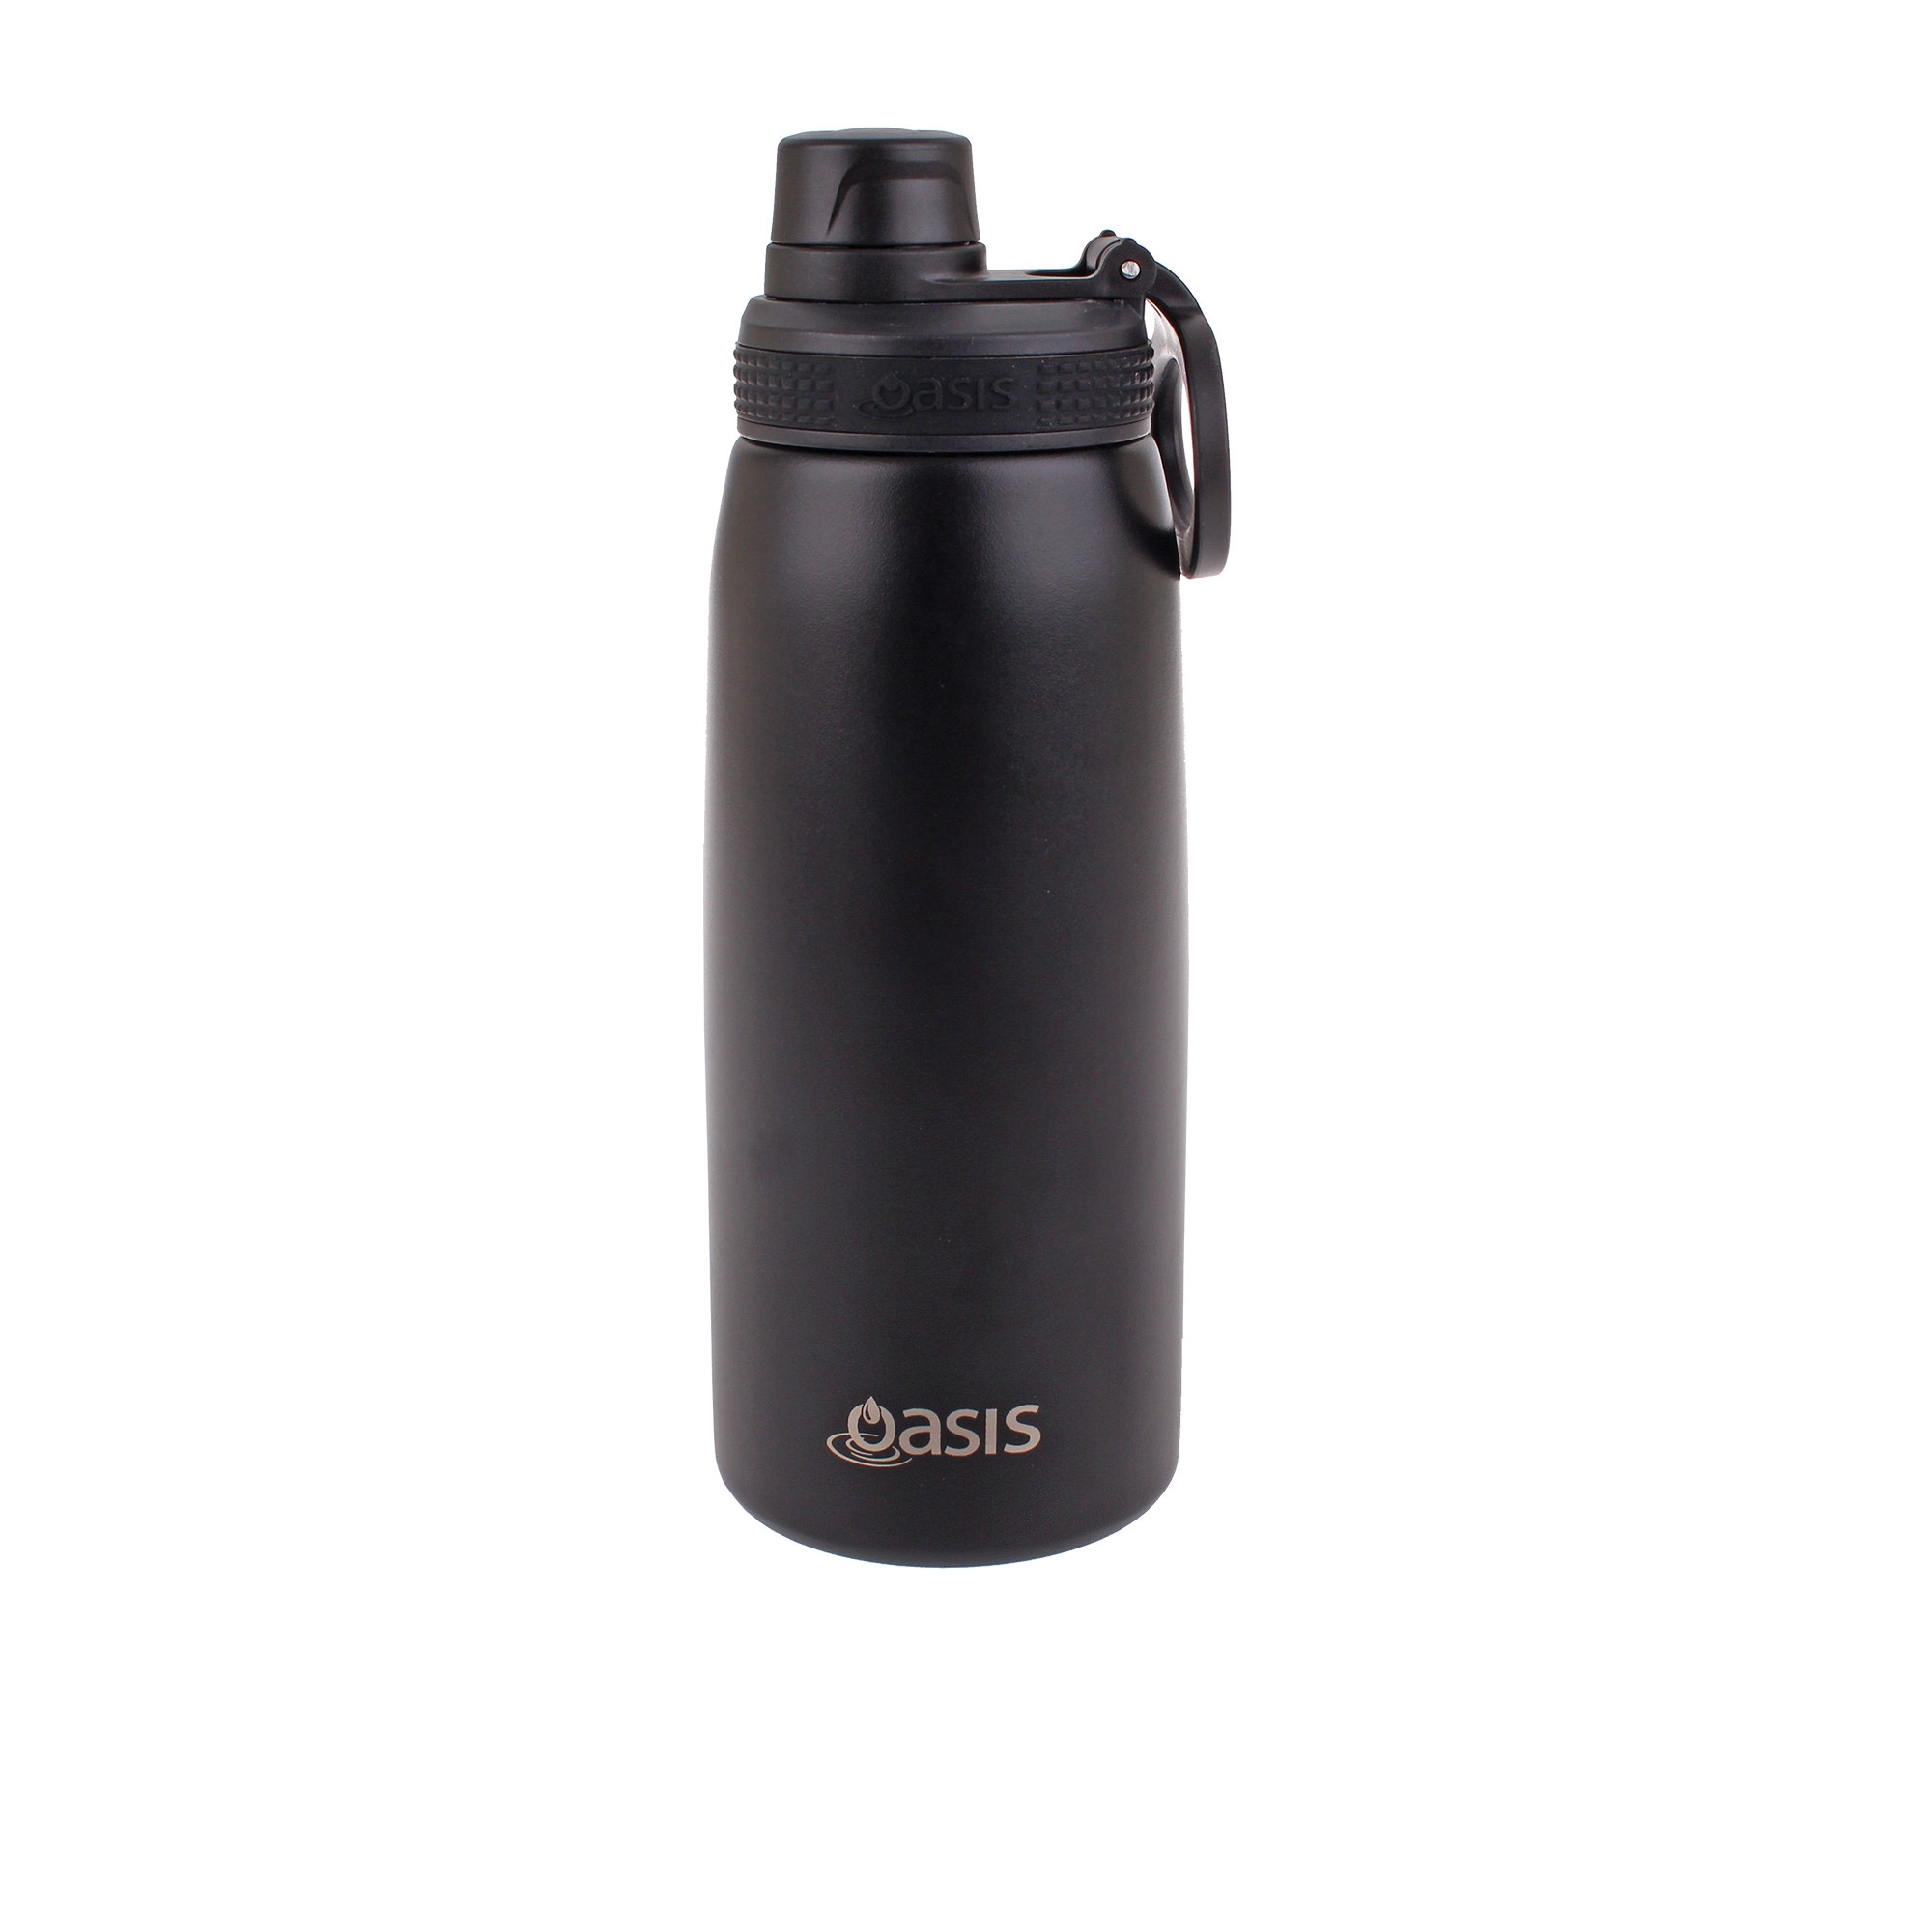 Oasis Double Wall Insulated Sports Bottle 780ml Black Image 1